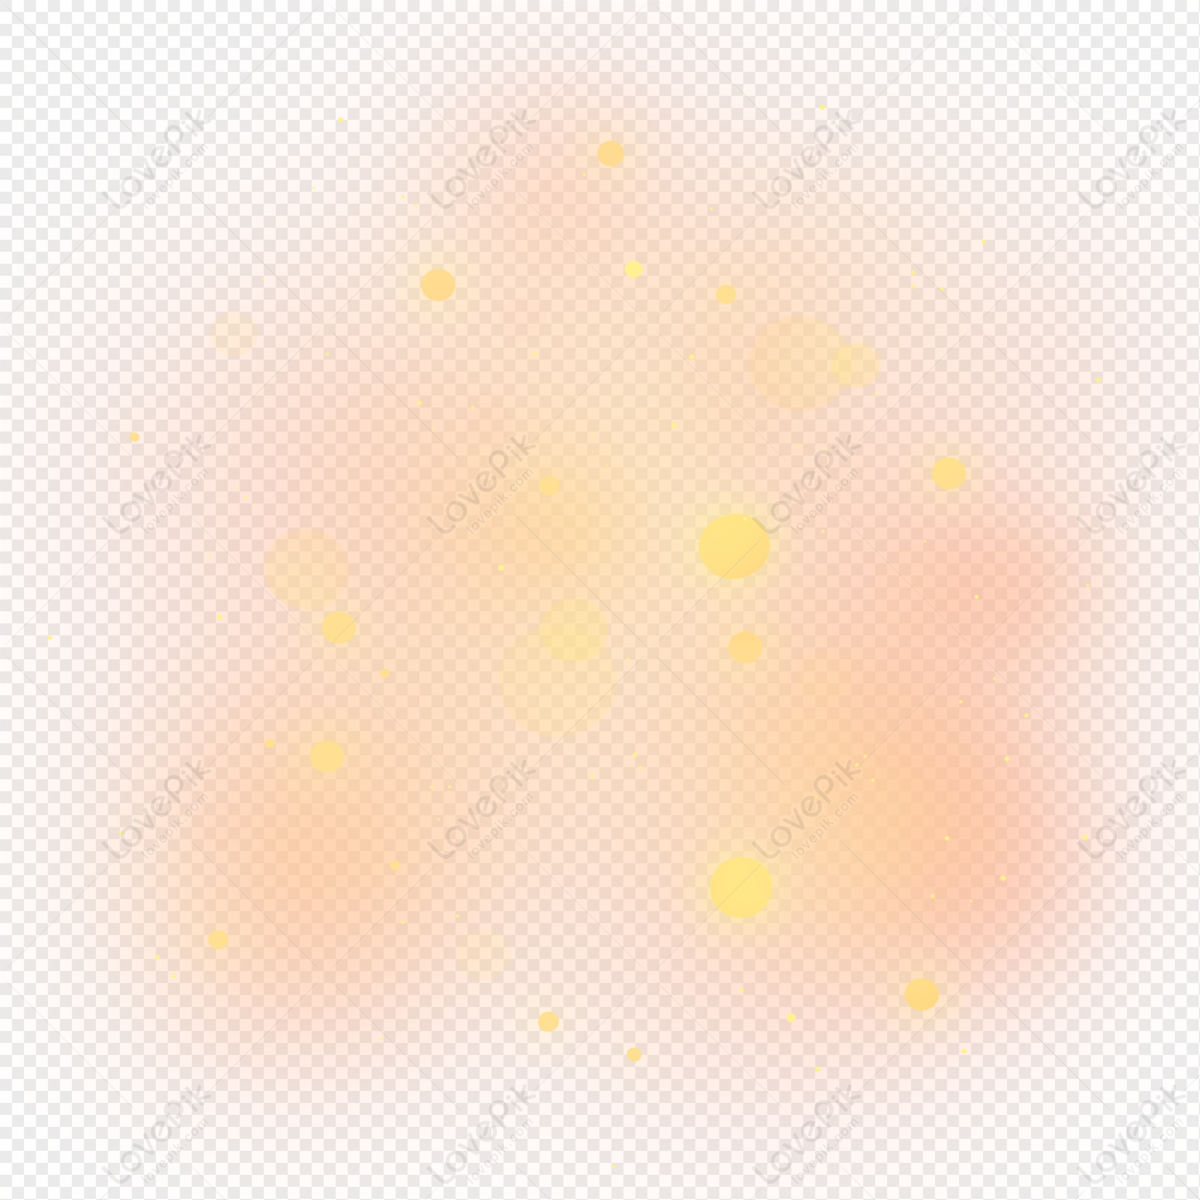 Transparent Hd Png Download - Glowing Light Transparent Gif,Shine Effect Png  - free transparent png images 